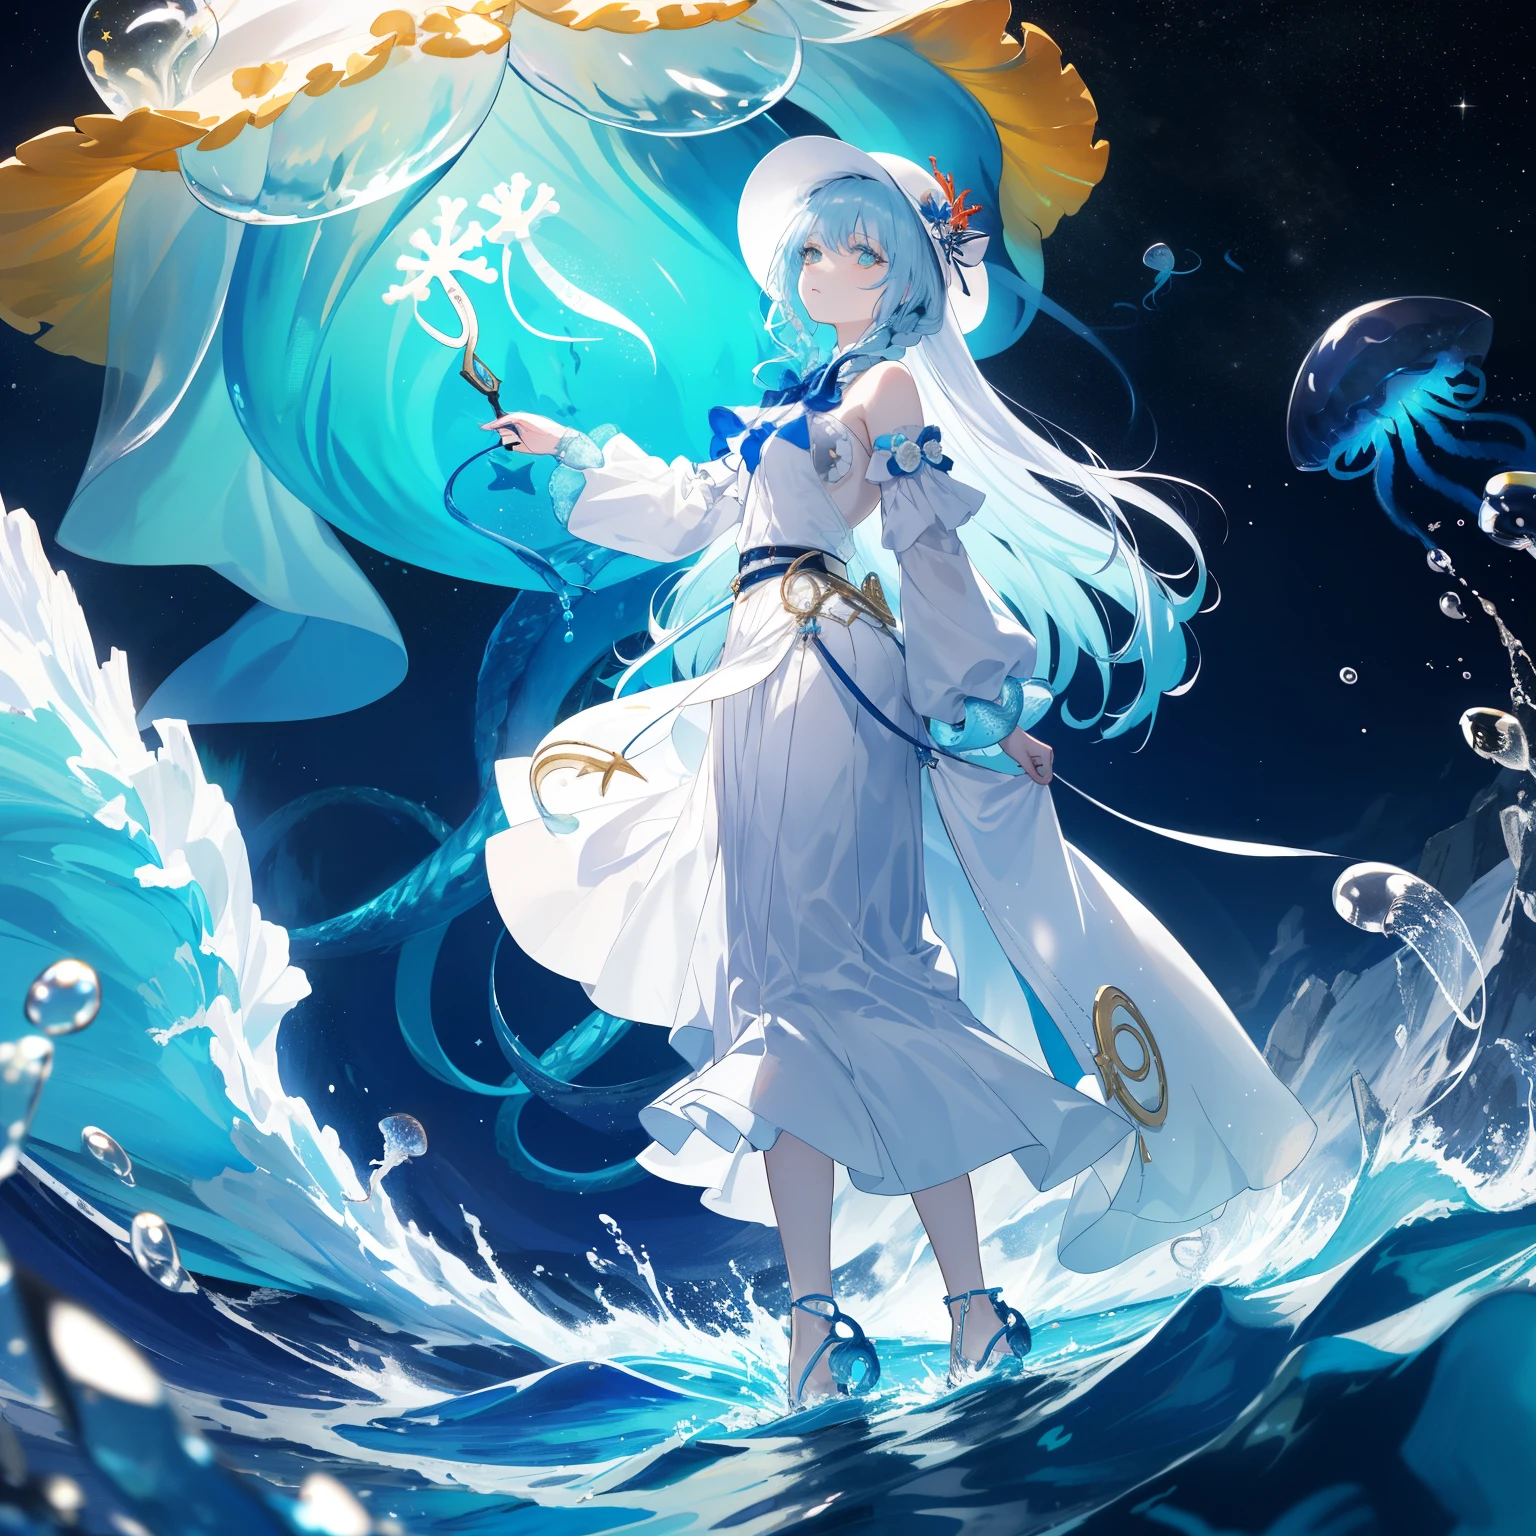 ((best quality)), ((masterpiece)), (detailed), ocean, night, (starry_sky), Cool_colors, 1girl, standing, full_body, (front_view), White_fishtail_skirt, long_skirt, white_wide_brimmed_hat, ((blue_tentacle_hair)), ((Pale_skin)), beautiful_face, Closed_eyes, ((long_eyelashes)), expressionless, ((White_coral)), (Transparent_little_jellyfish)